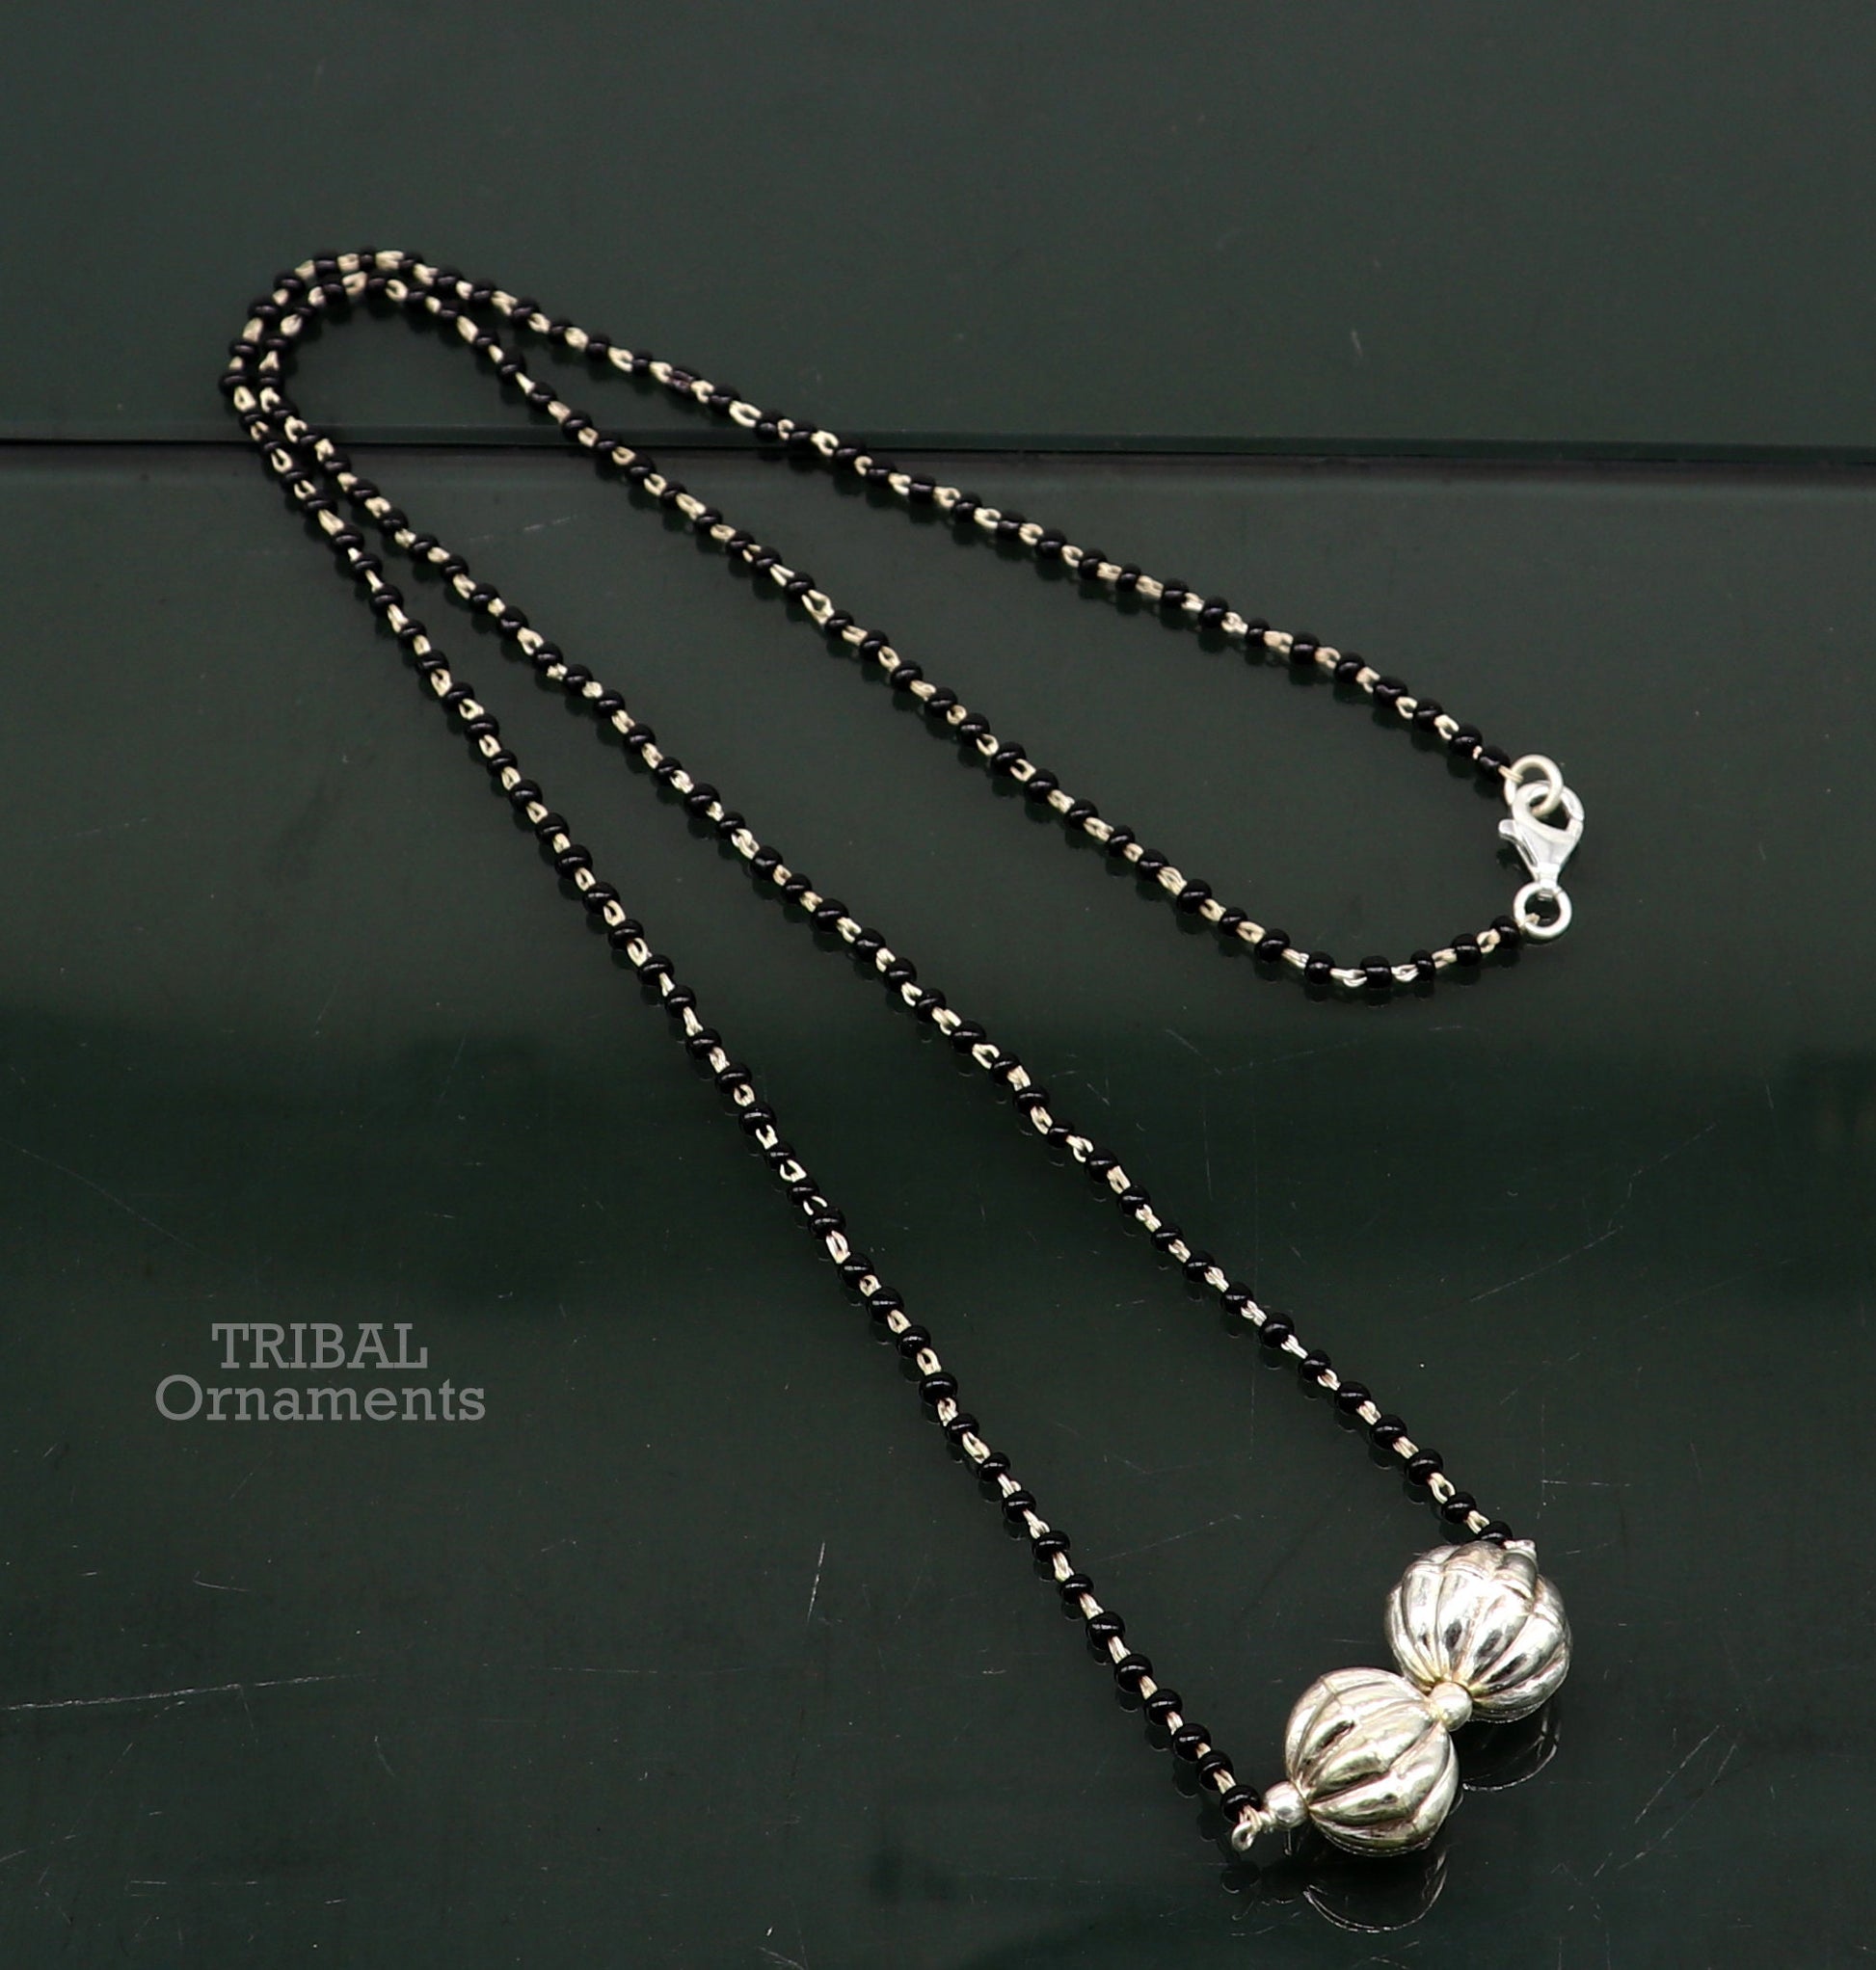 Pure 925 sterling silver black beads chain necklace, vintage ball pendant, traditional style brides Mangalsutra necklace set445 - TRIBAL ORNAMENTS